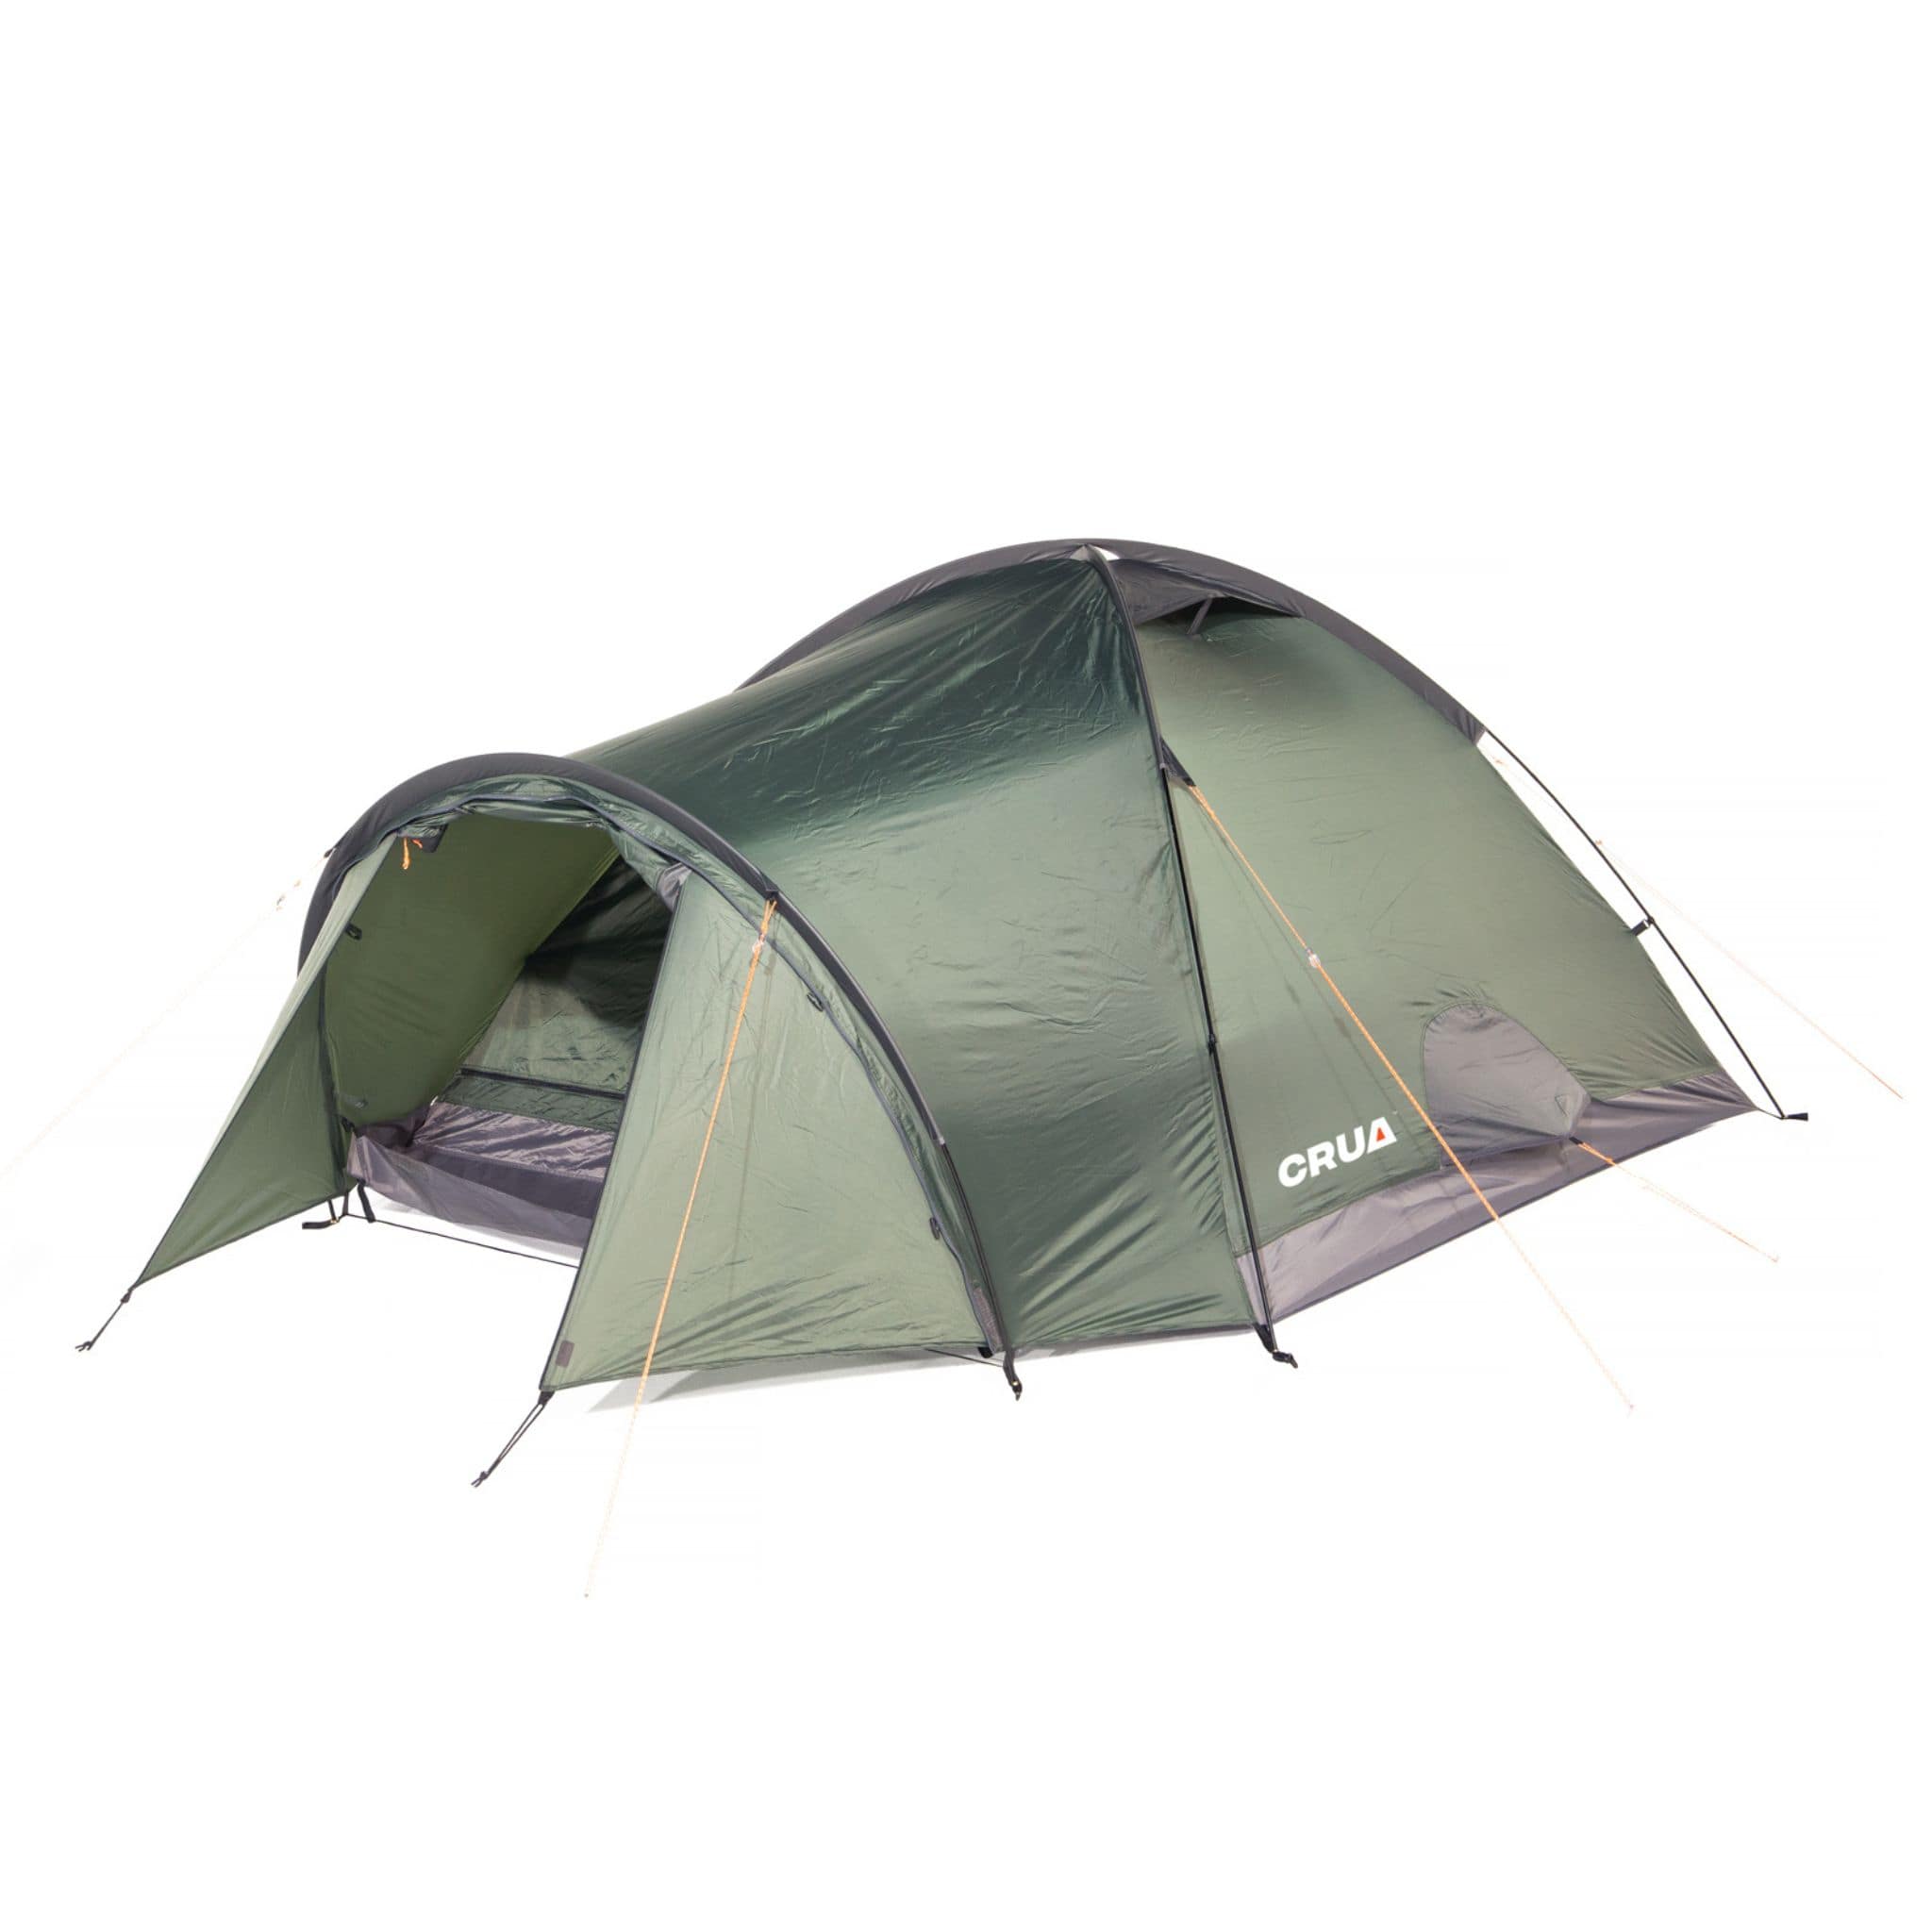 DUO MAXX | 3 PERSON CAMPING, DOME TENT - ALL WEATHER COMPATIBLE, WATERPROOF, SPACIOUS SHELTER WITH ENHANCED COMFORT AND DURABILITY